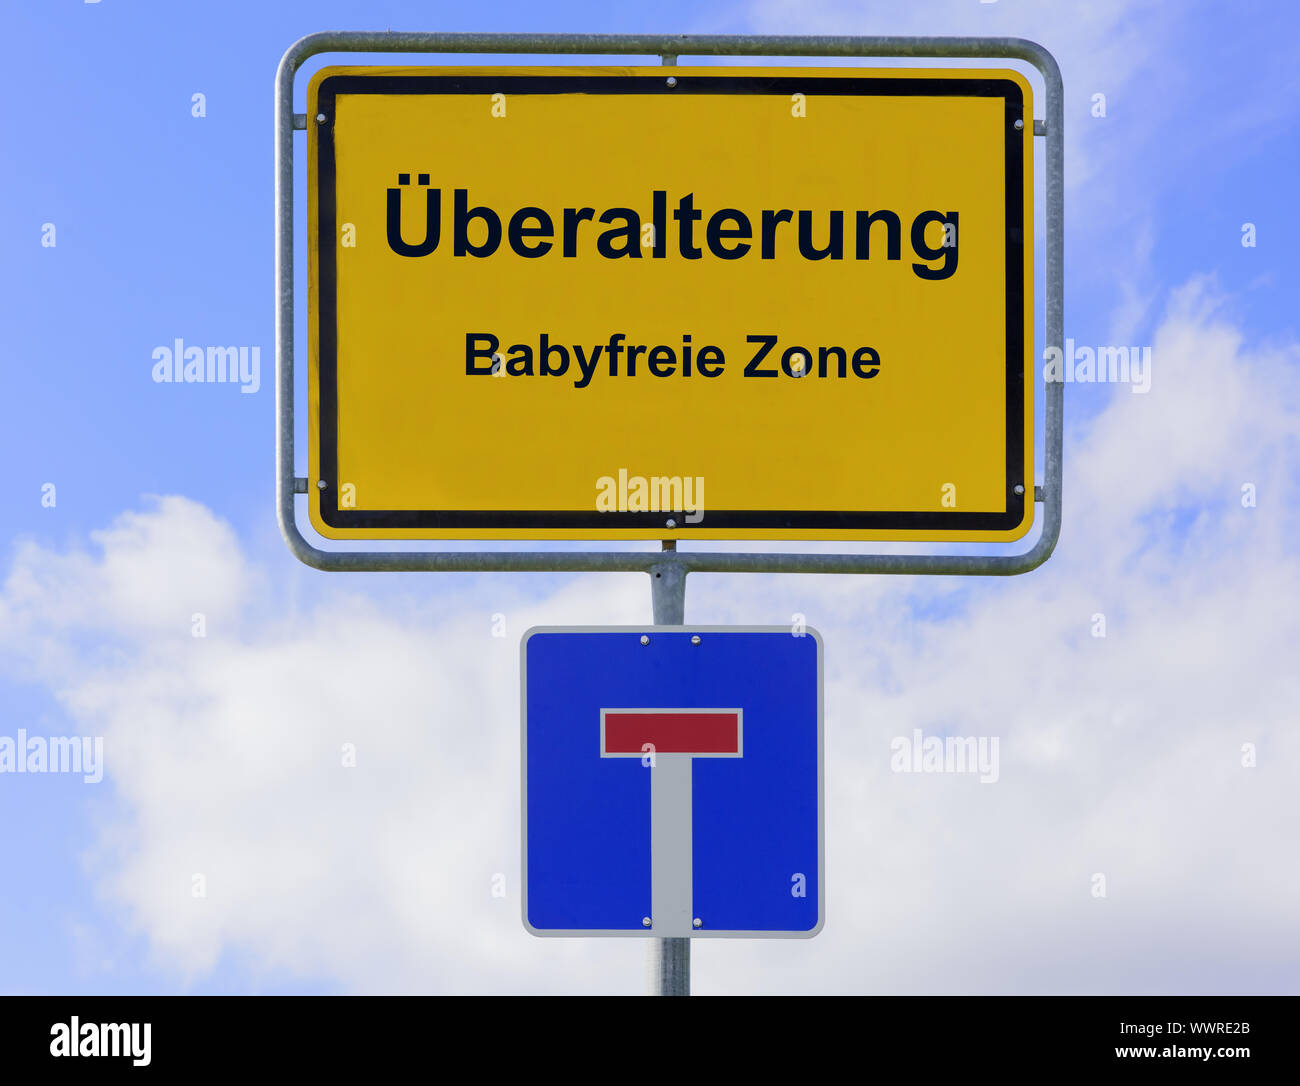 Overaging in the baby-free zone on the place-name sign Stock Photo